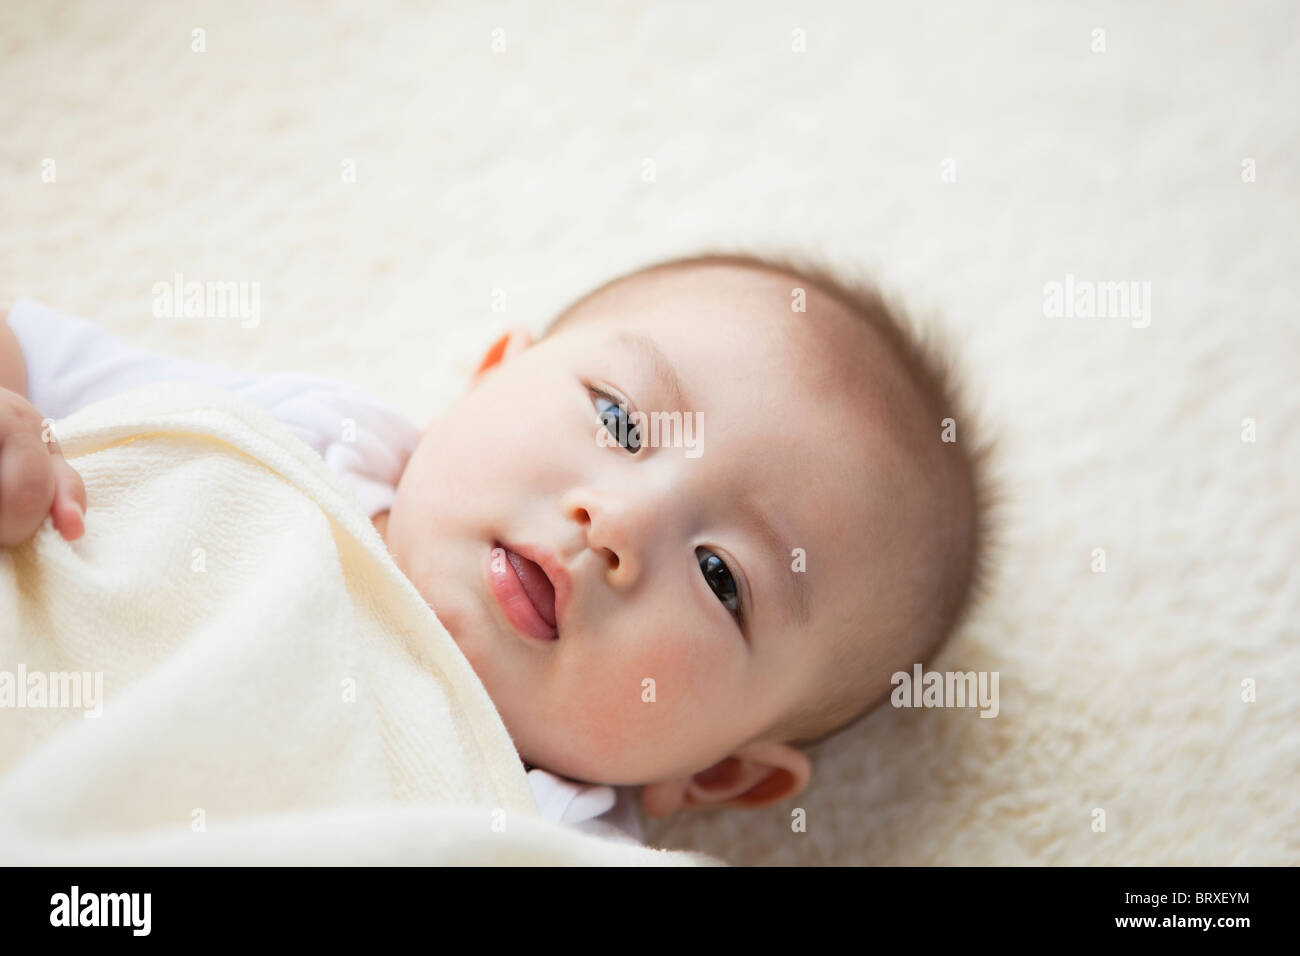 High Angle View of Baby Boy Lying on Back Banque D'Images